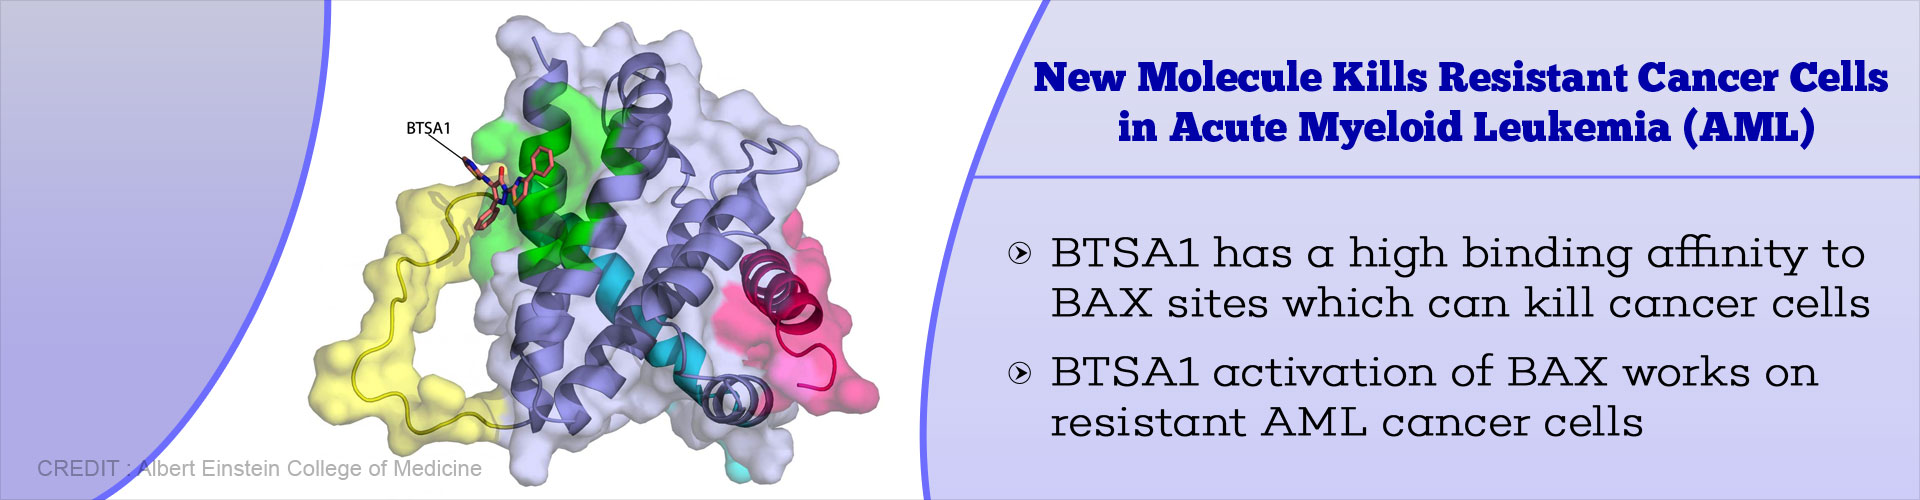 new molecule kills resistant cancer cells in acute myeloid leukemia (AML)
- BTSA1 has a high binding affinity to BAX sites which can kill cancer cells
- BTSA1 activation of BAX works on resistant AML cancer cells